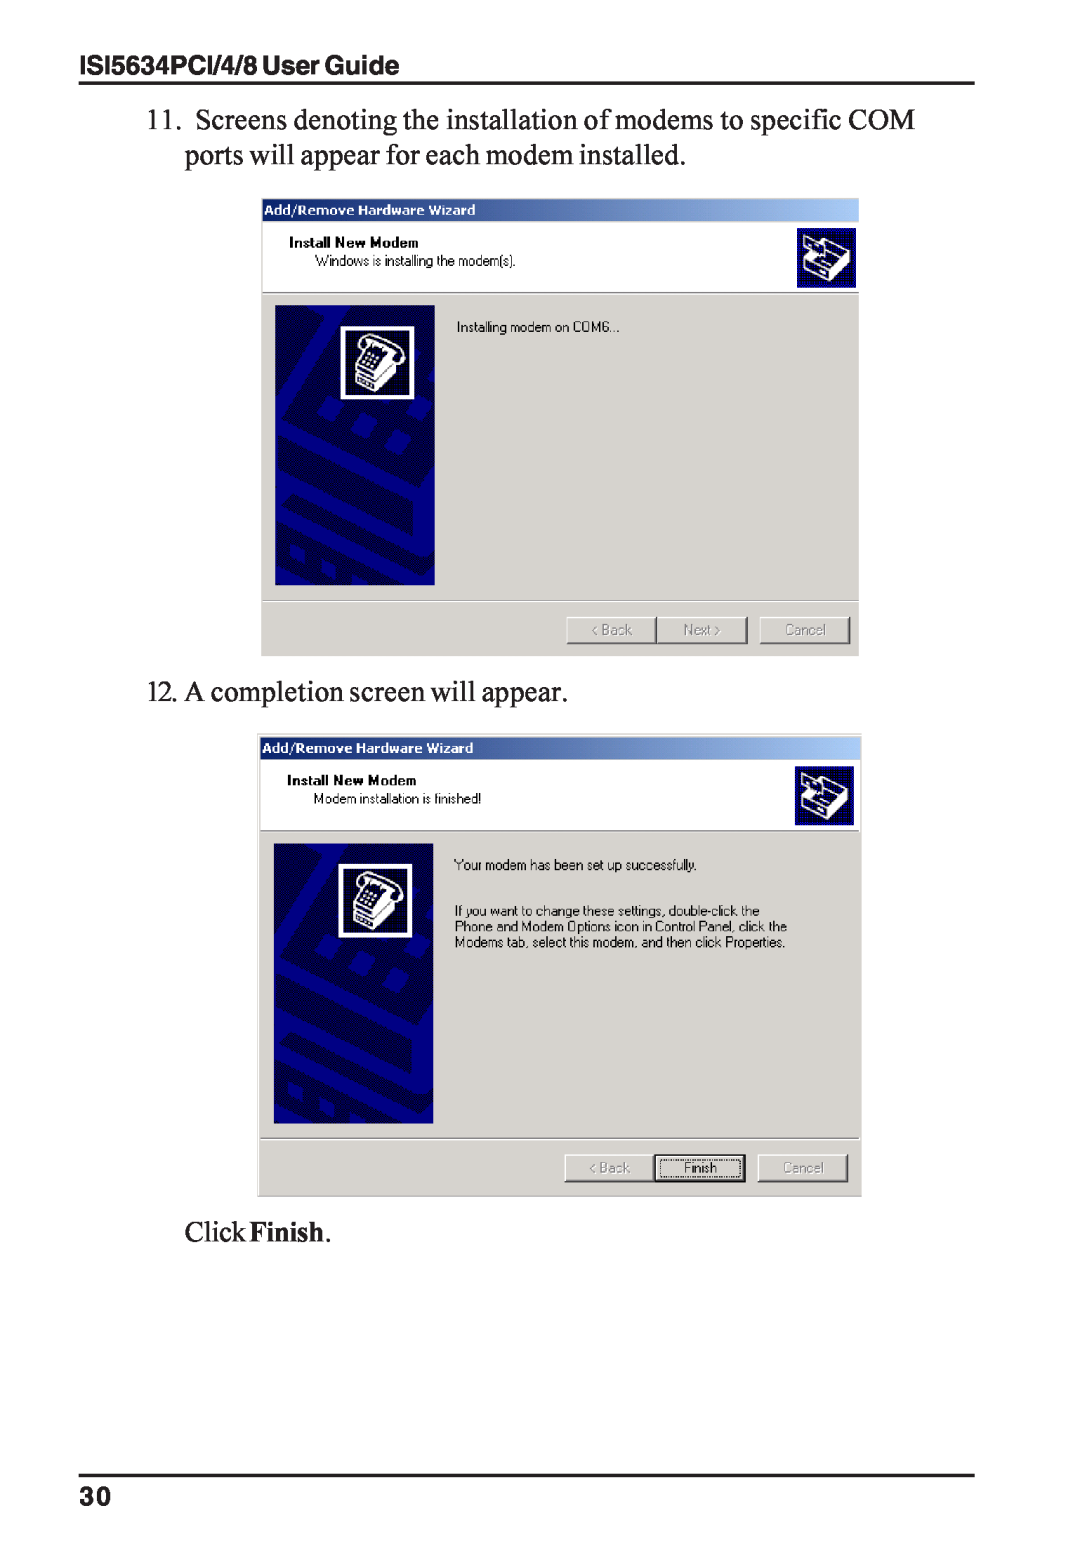 Multi-Tech Systems manual A completion screen will appear ClickFinish, ISI5634PCI/4/8 User Guide 